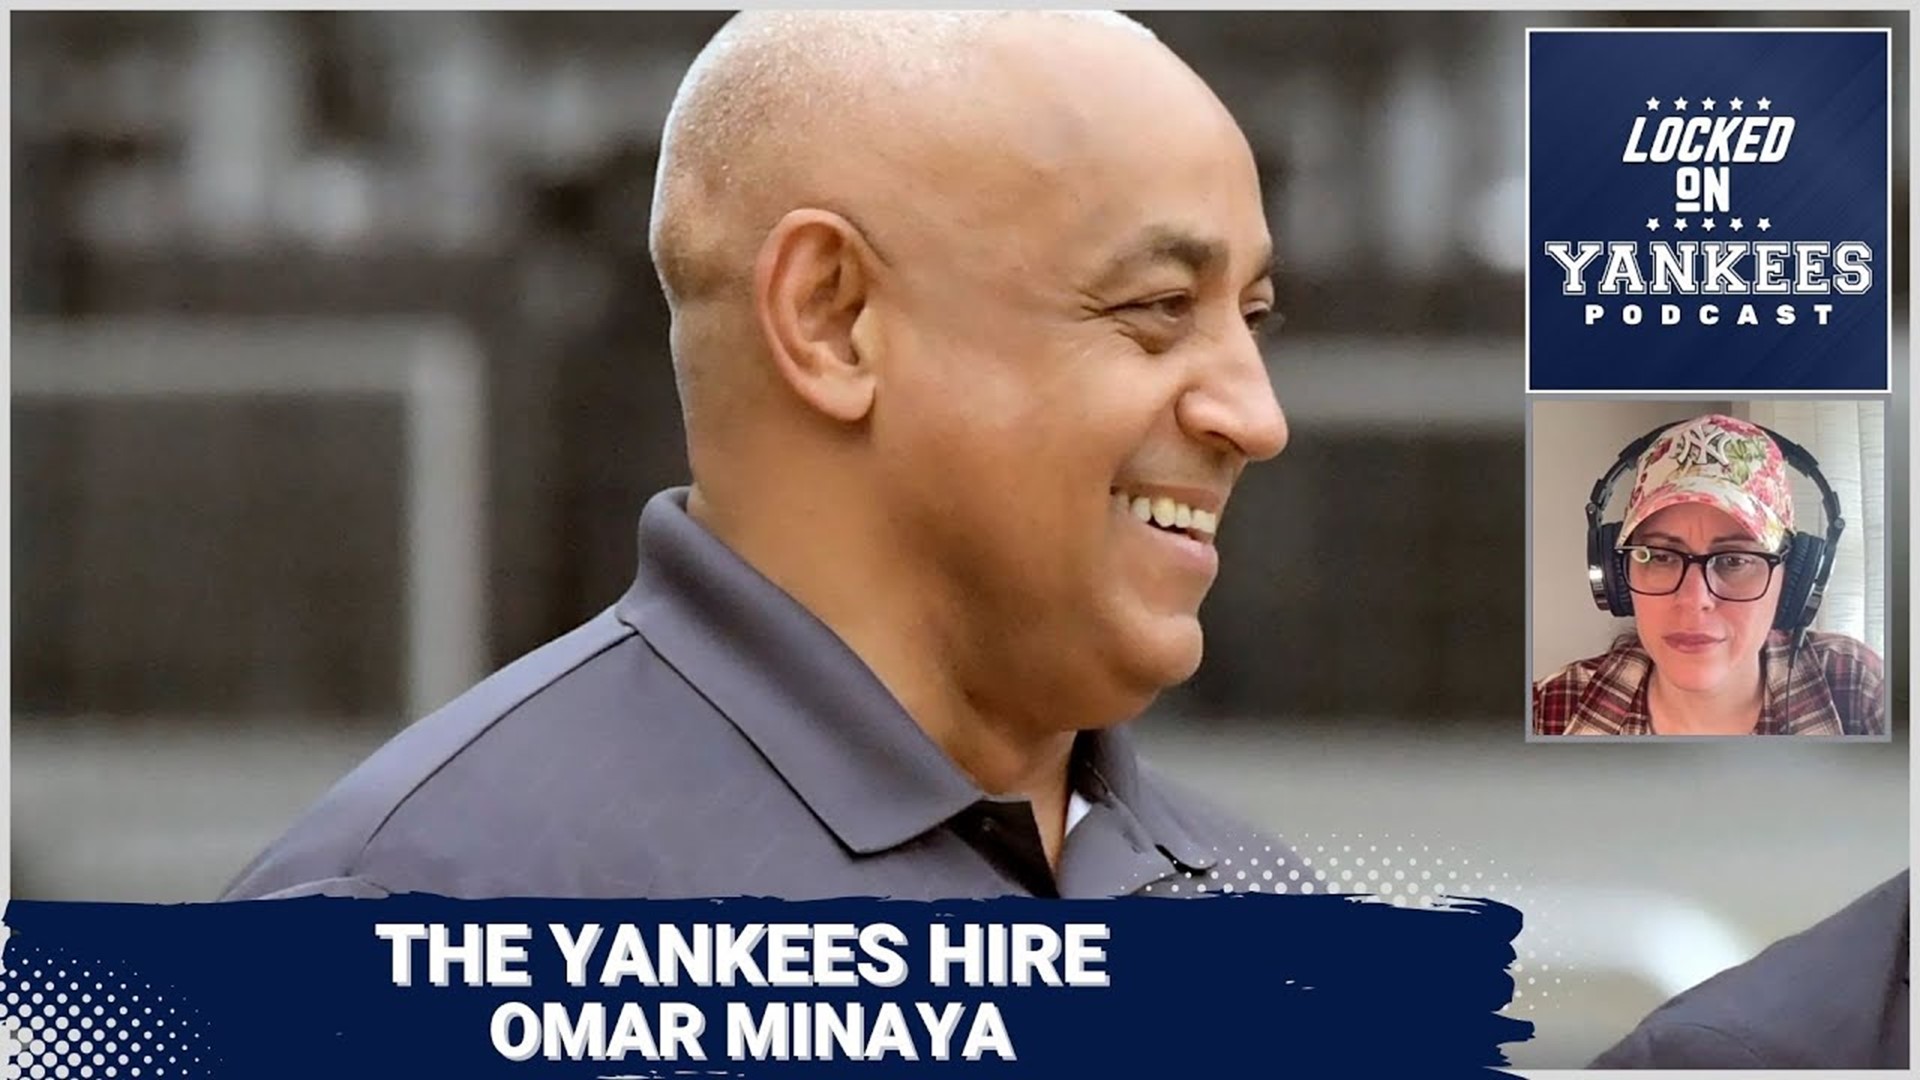 The day after the Yankees announced Brian Sabean's hire, they announced they also brought on former Mets GM Omar Minaya to work as a senior advisor.